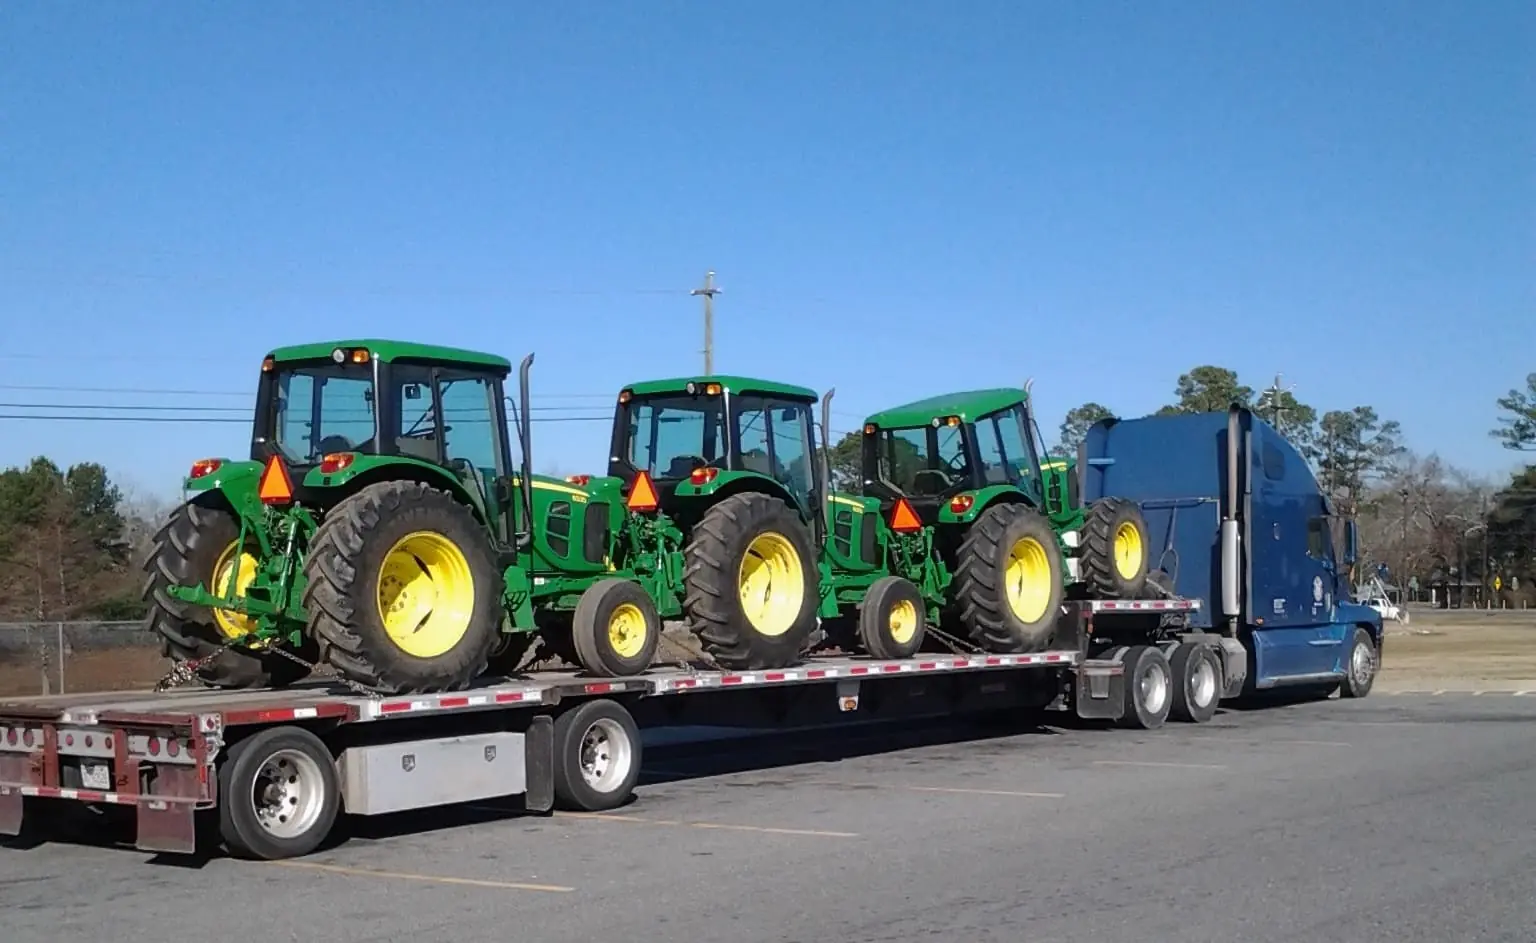 3 tractors being shipped on the back of a flatbed freight truck